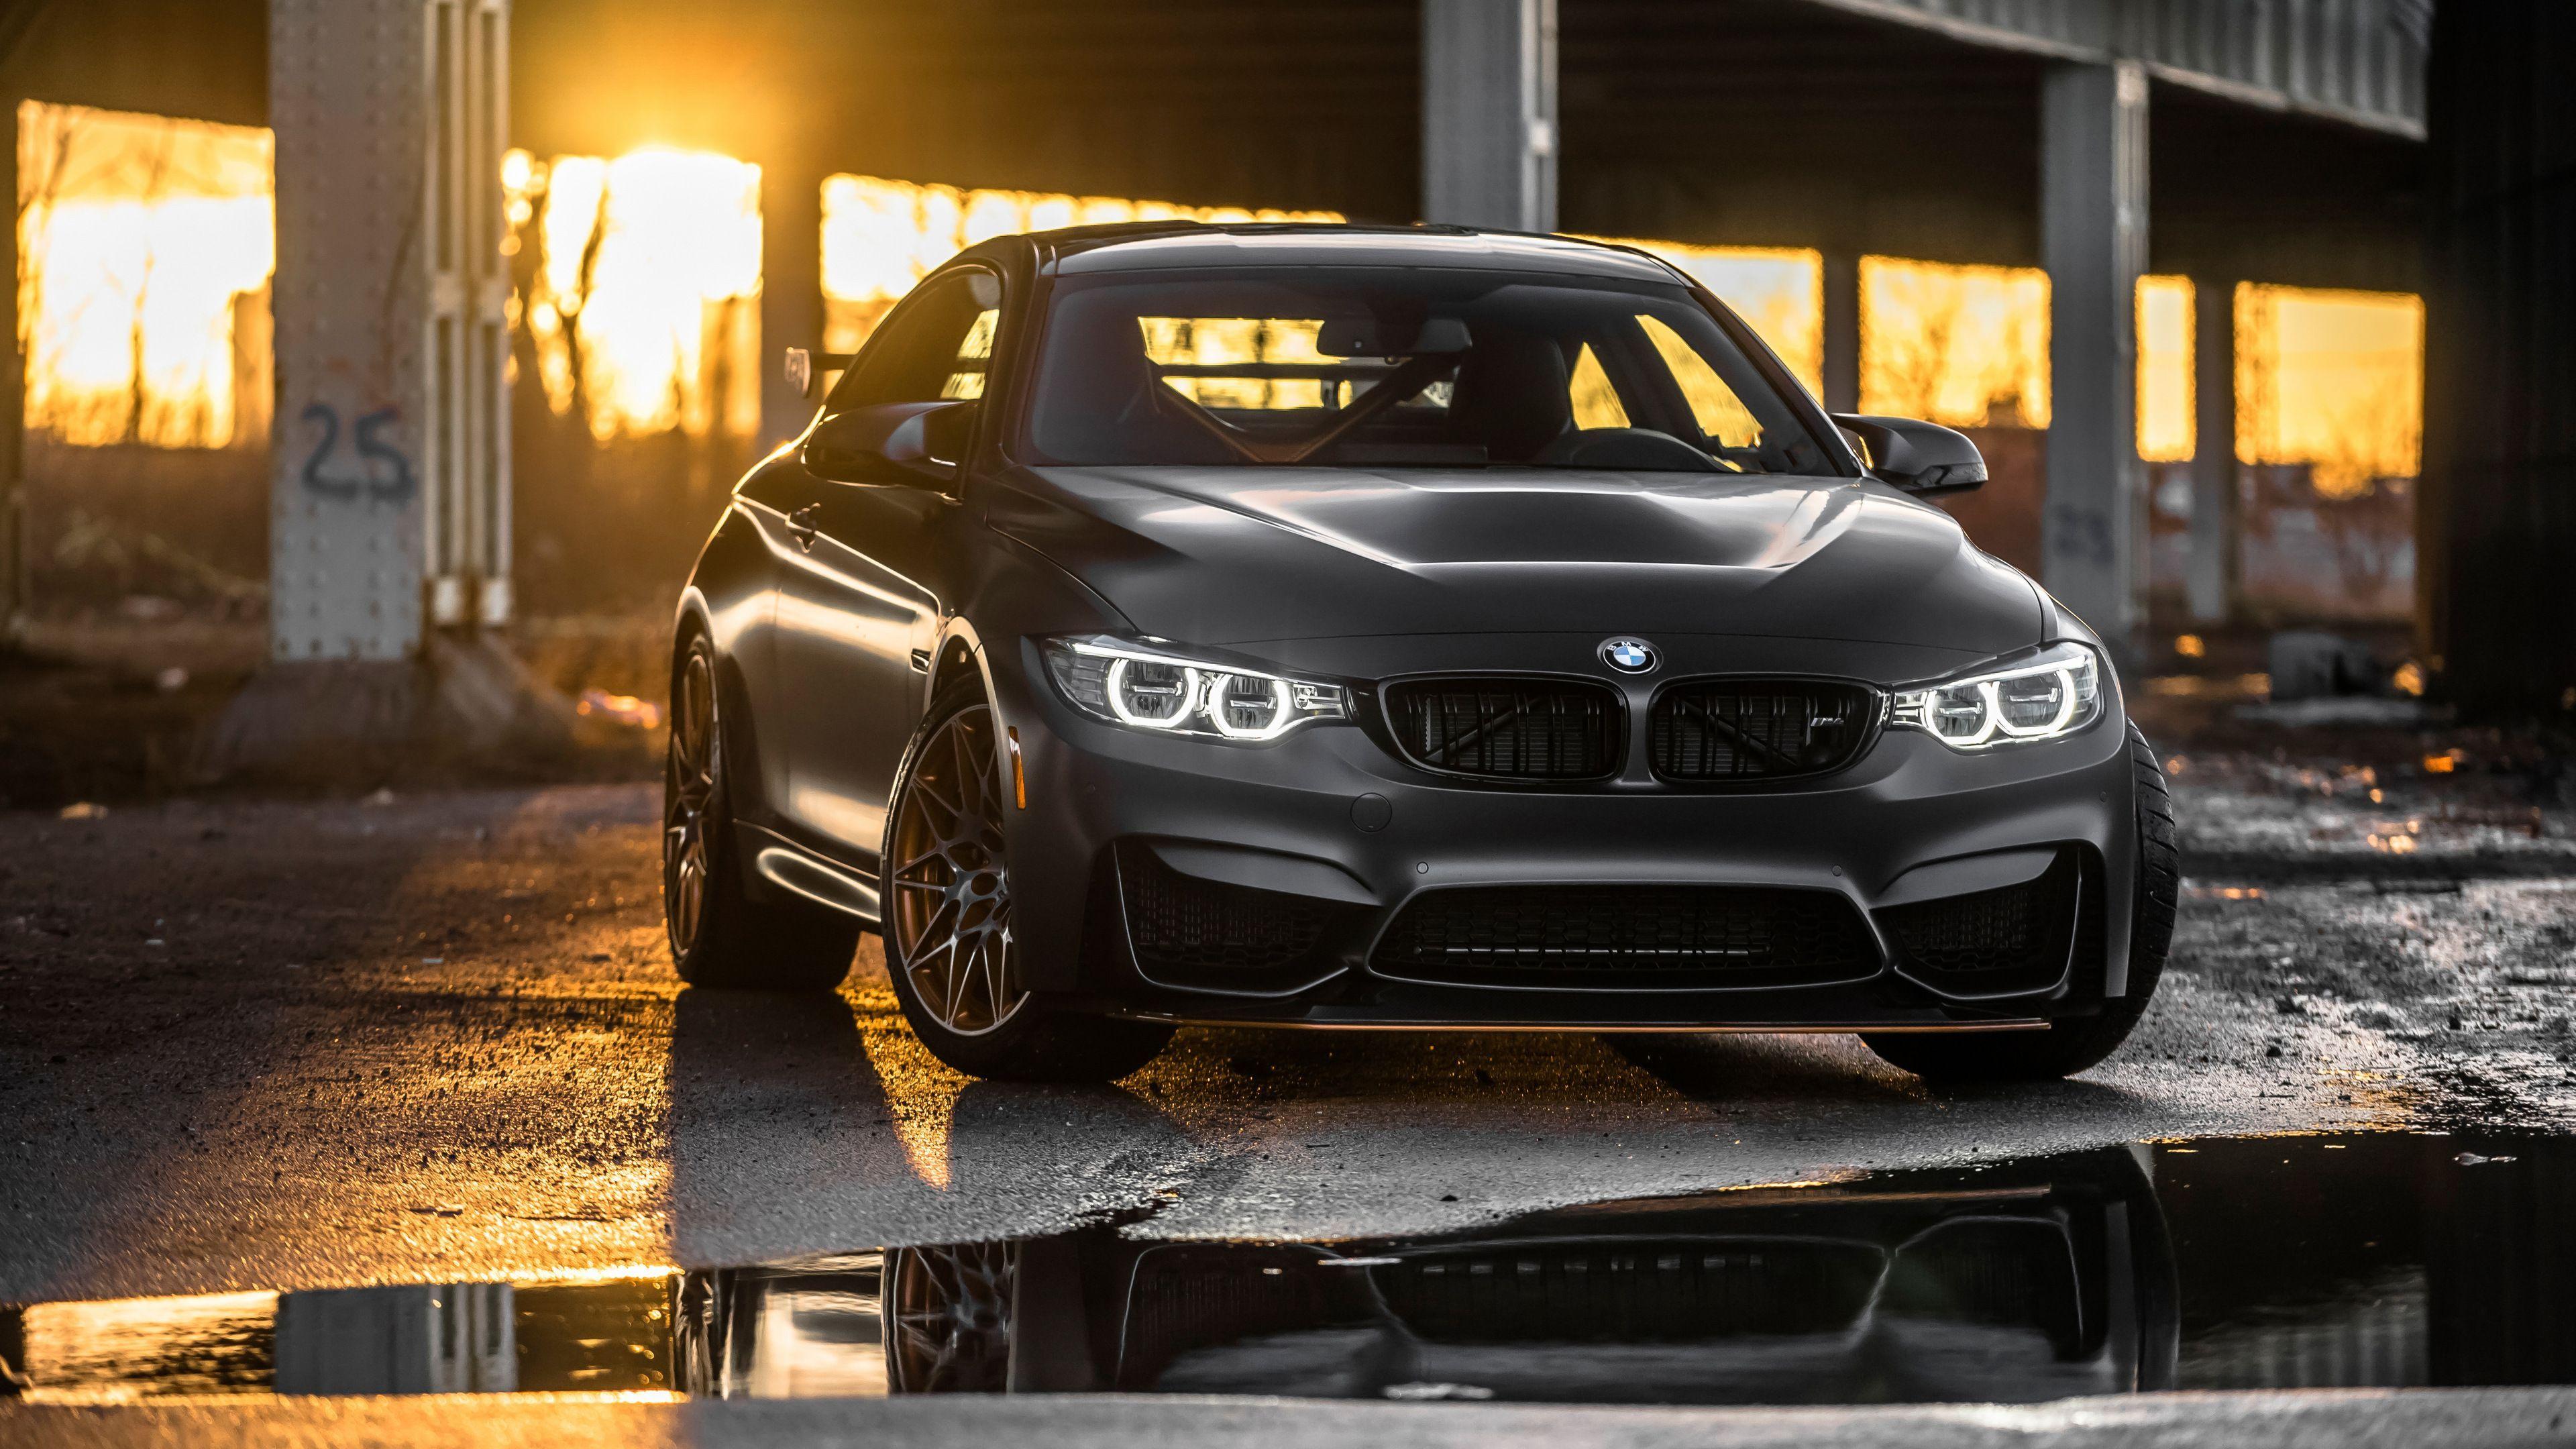 Bmw M4 Hd Wallpapers Top Free Bmw M4 Hd Backgrounds Wallpaperaccess